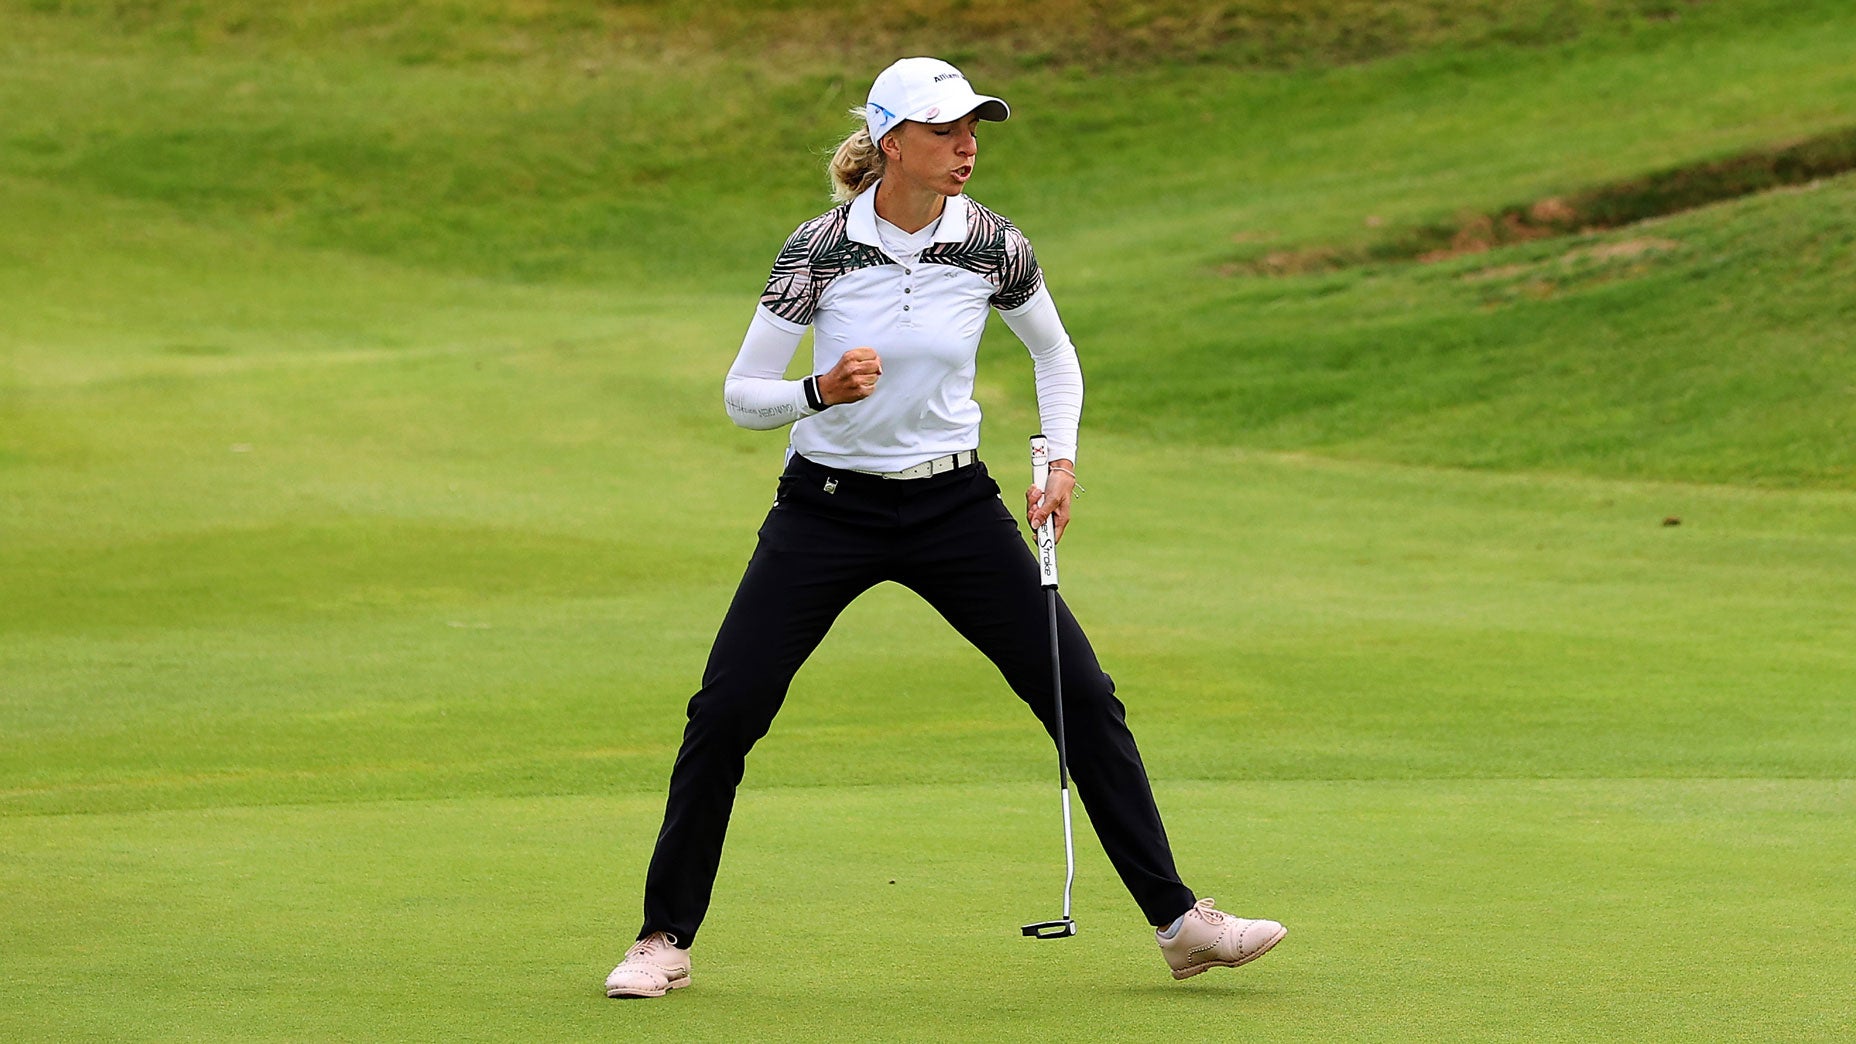 How Sophia Popov went from caddying to winning the Women's Open